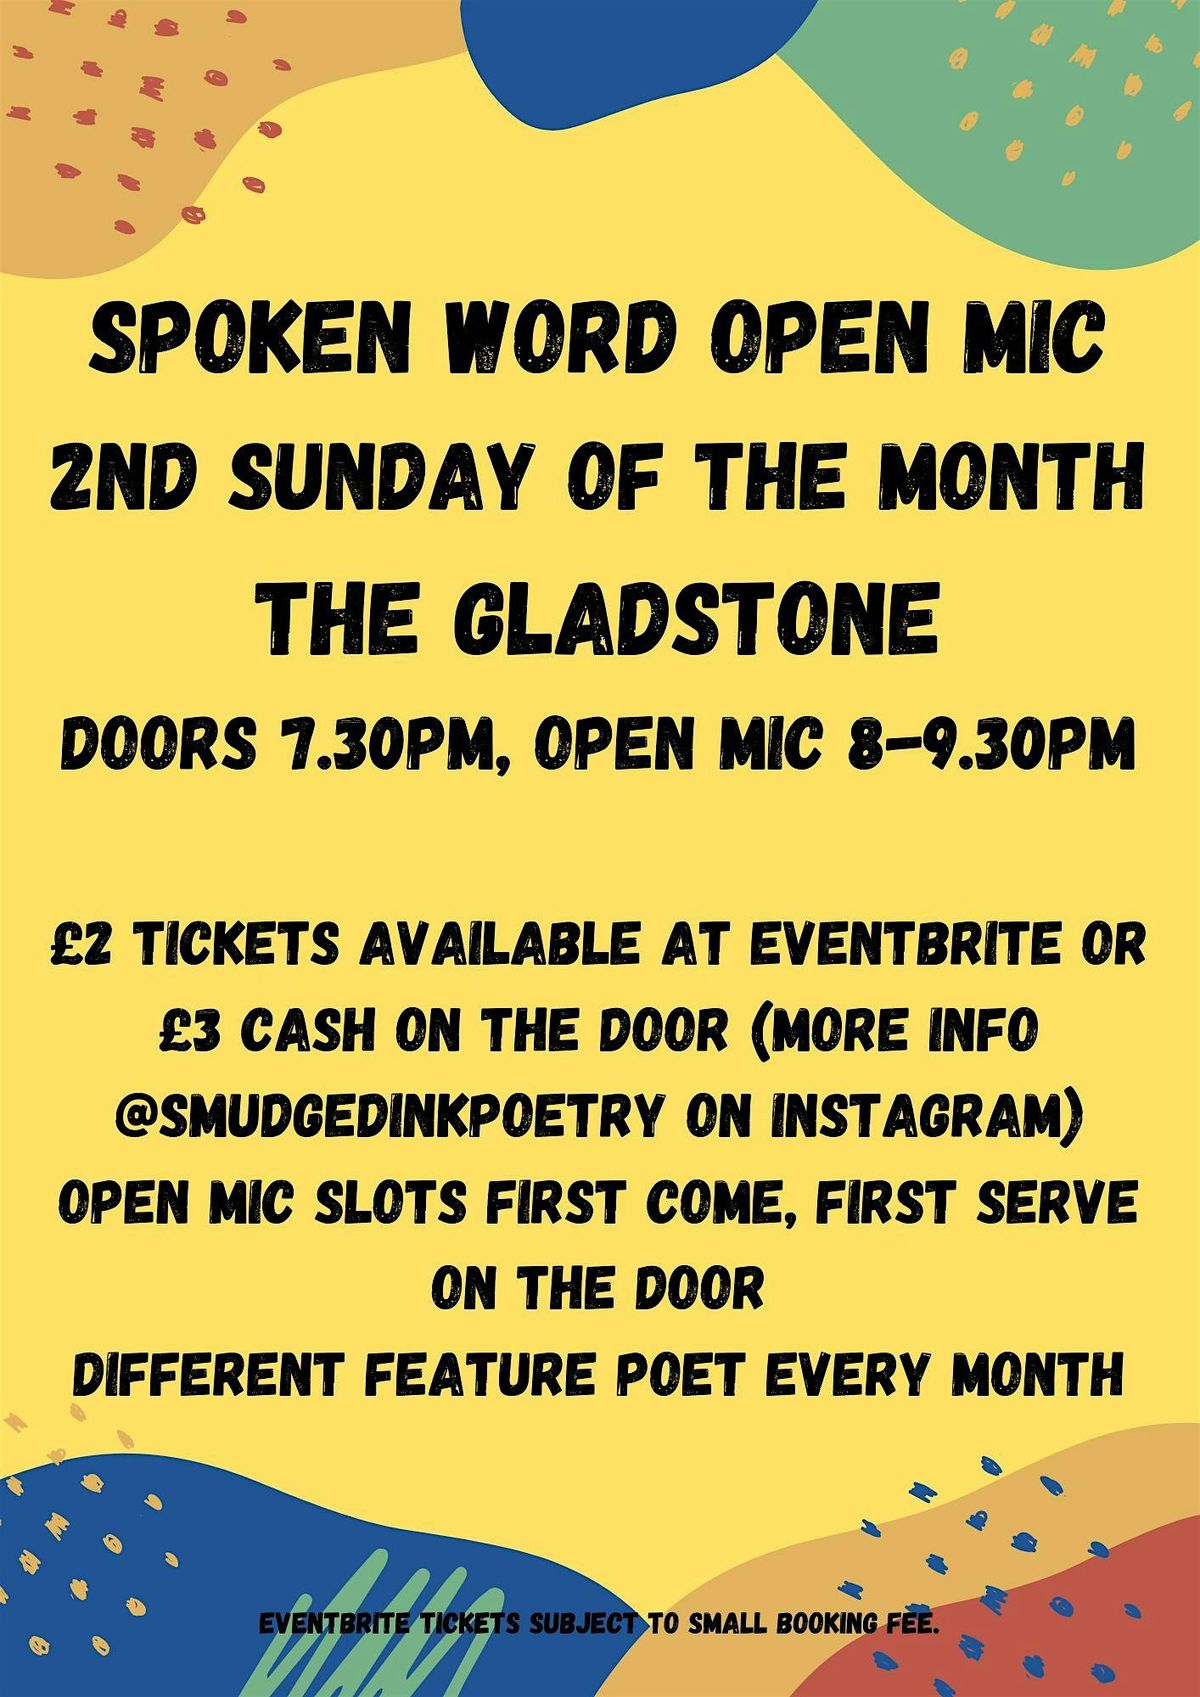 Spoken Word Open Mic at The Gladstone